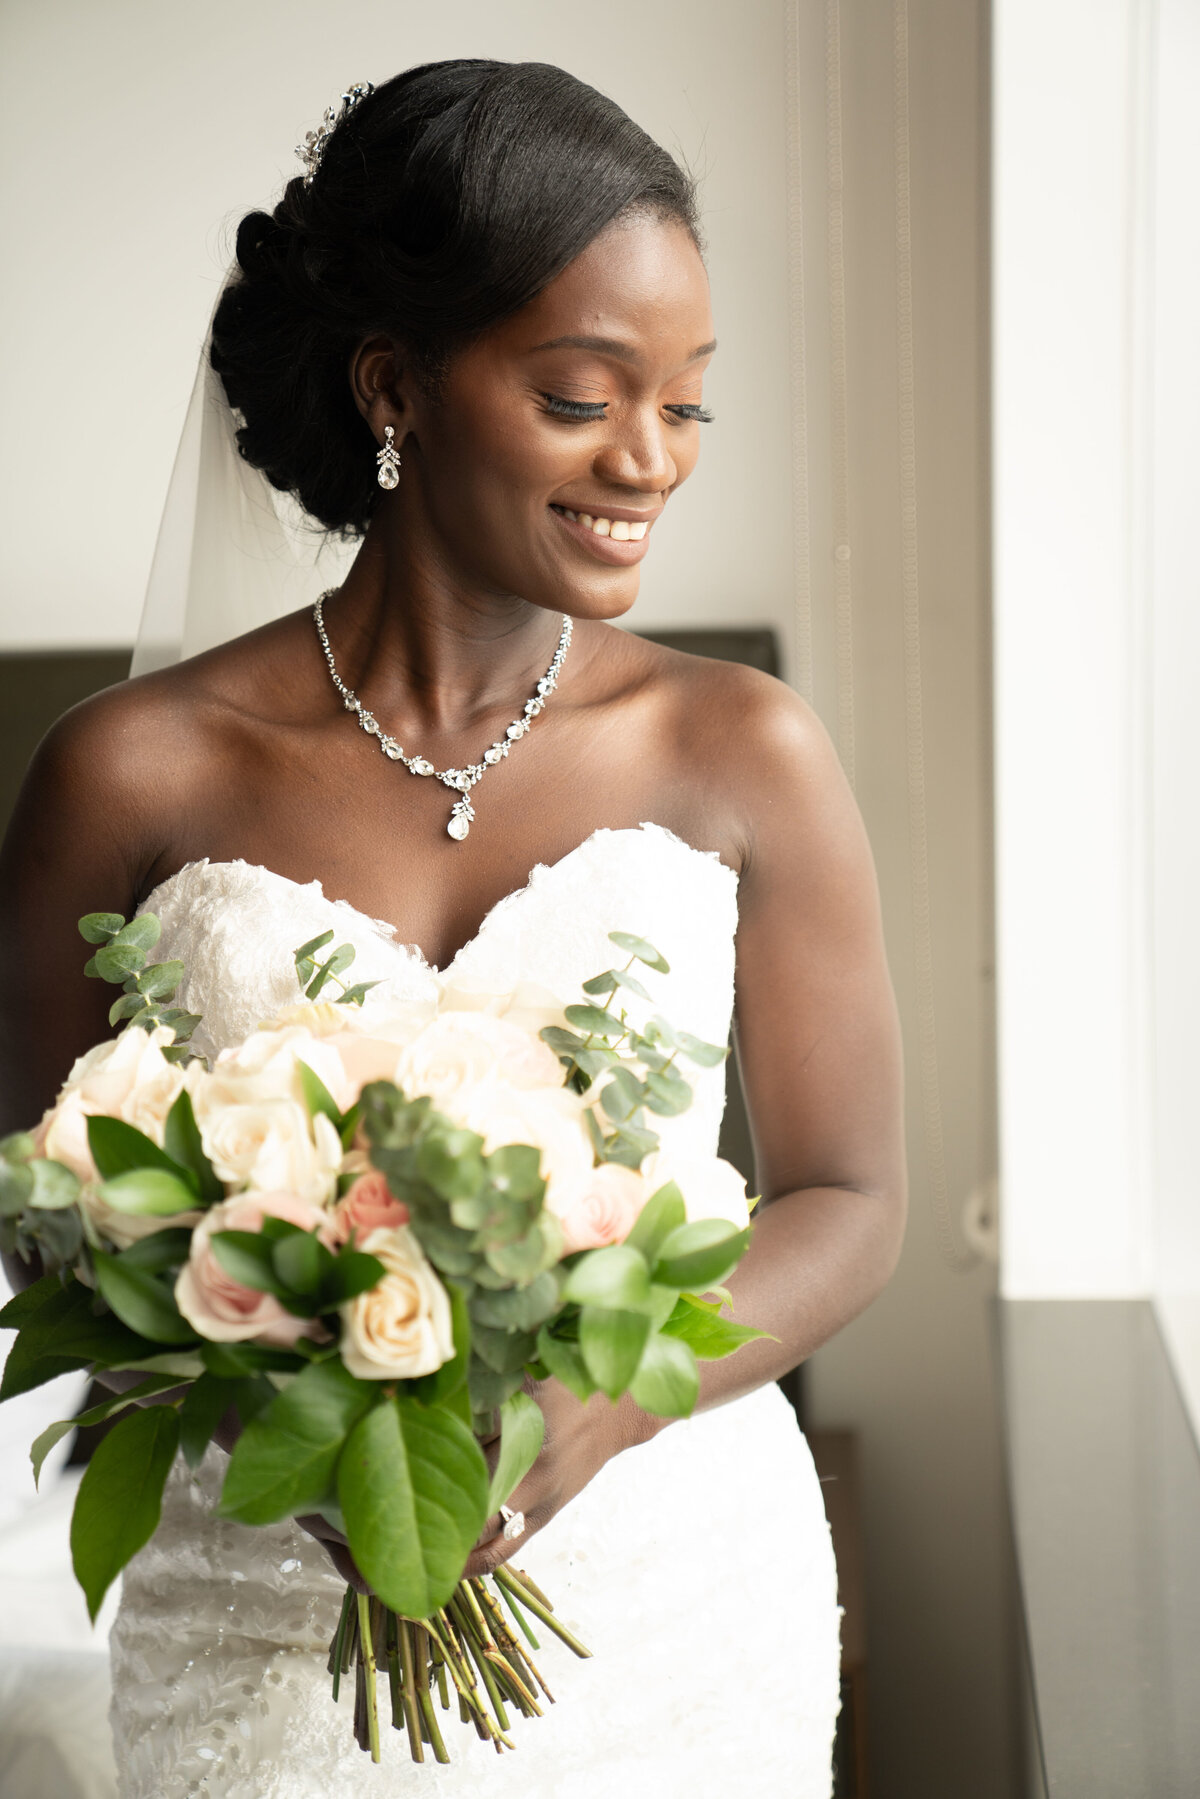 oruka events nigerian wedding planner in toronto black bride in white dress holding green and blush bouquet wiht pin up hair happy classy unique fun outdoor arlington estate  CLP07182